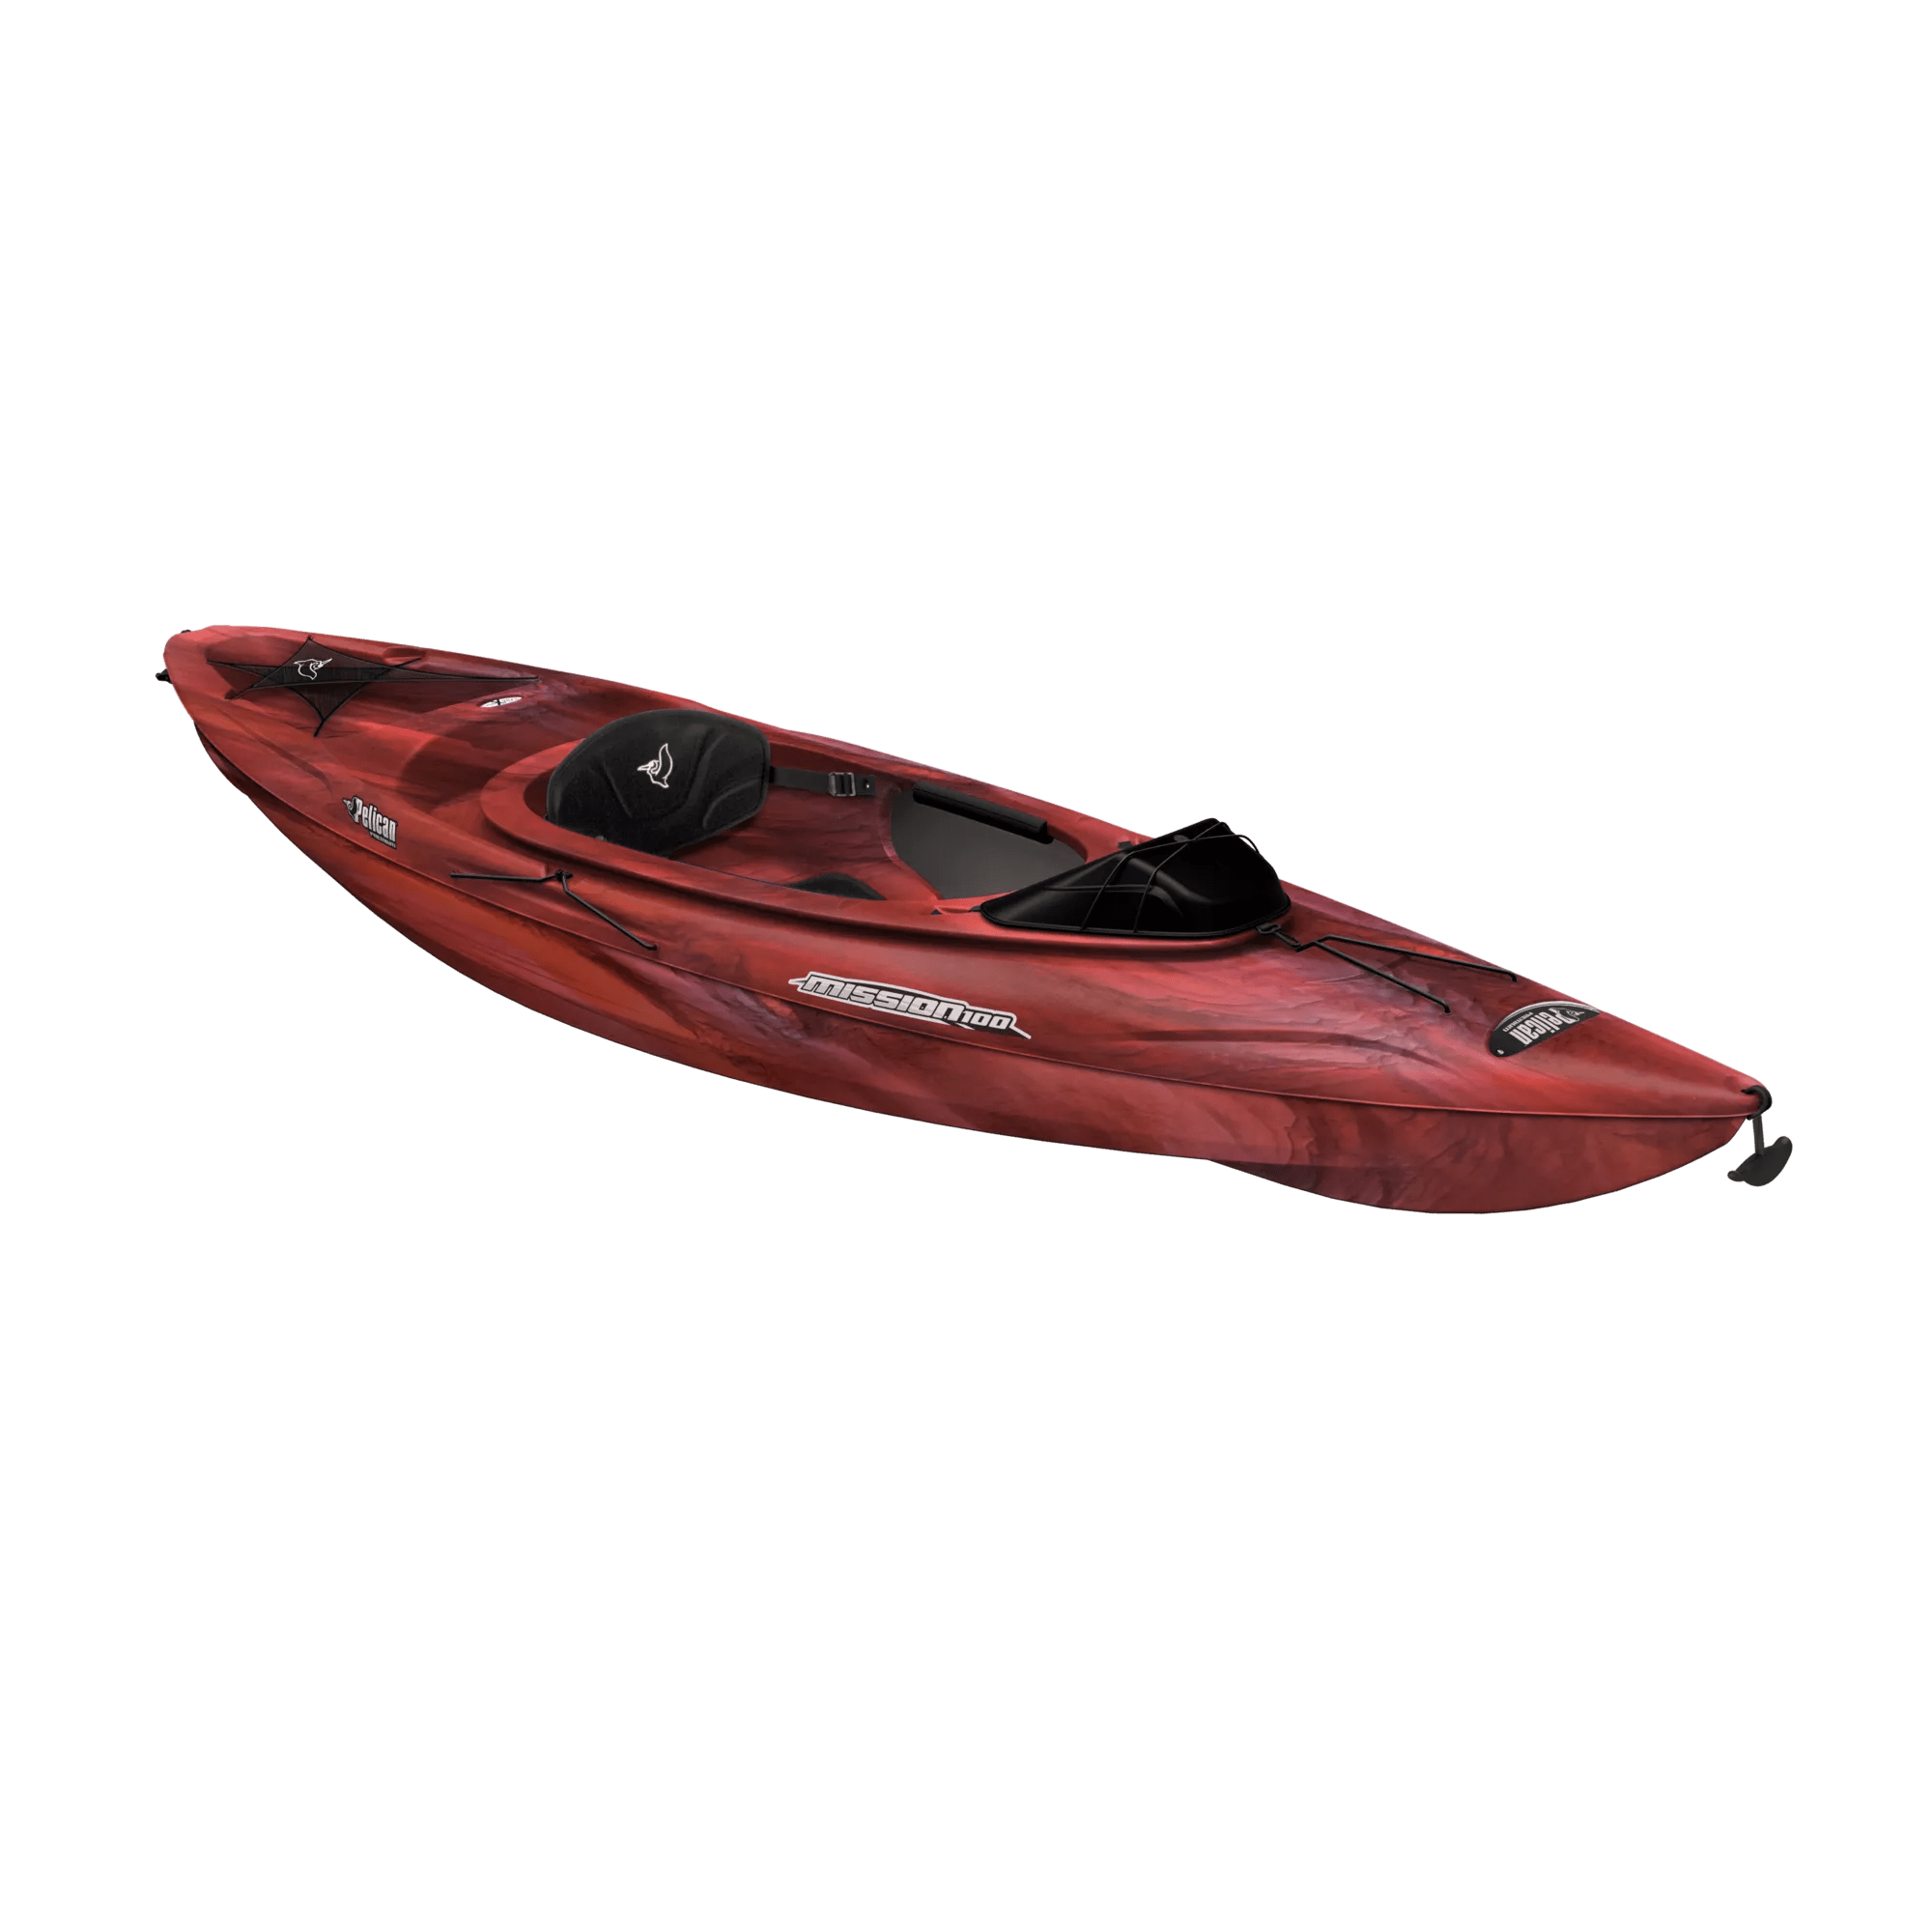 PELICAN - Mission 100 Kayak with Paddle - Red - KAP10P404 - 